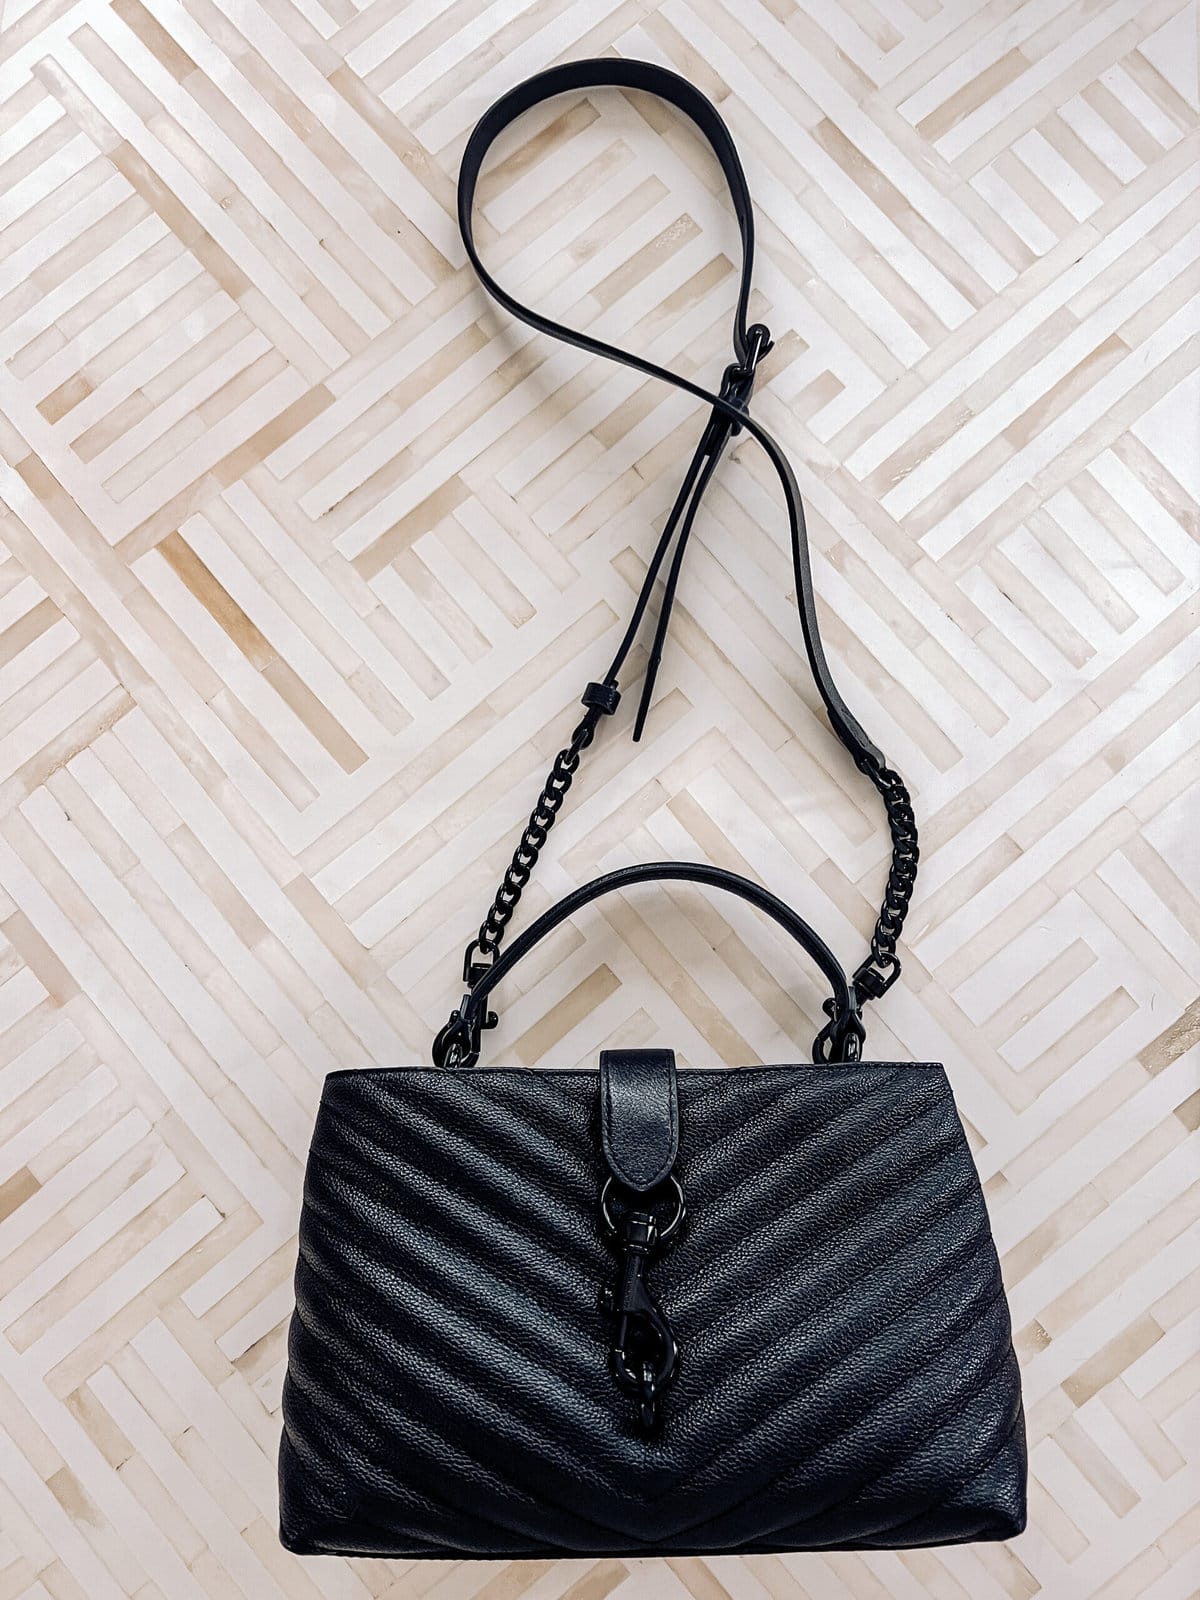 The Best Designer Bags from Nordstrom's Half-Yearly Sale - PureWow